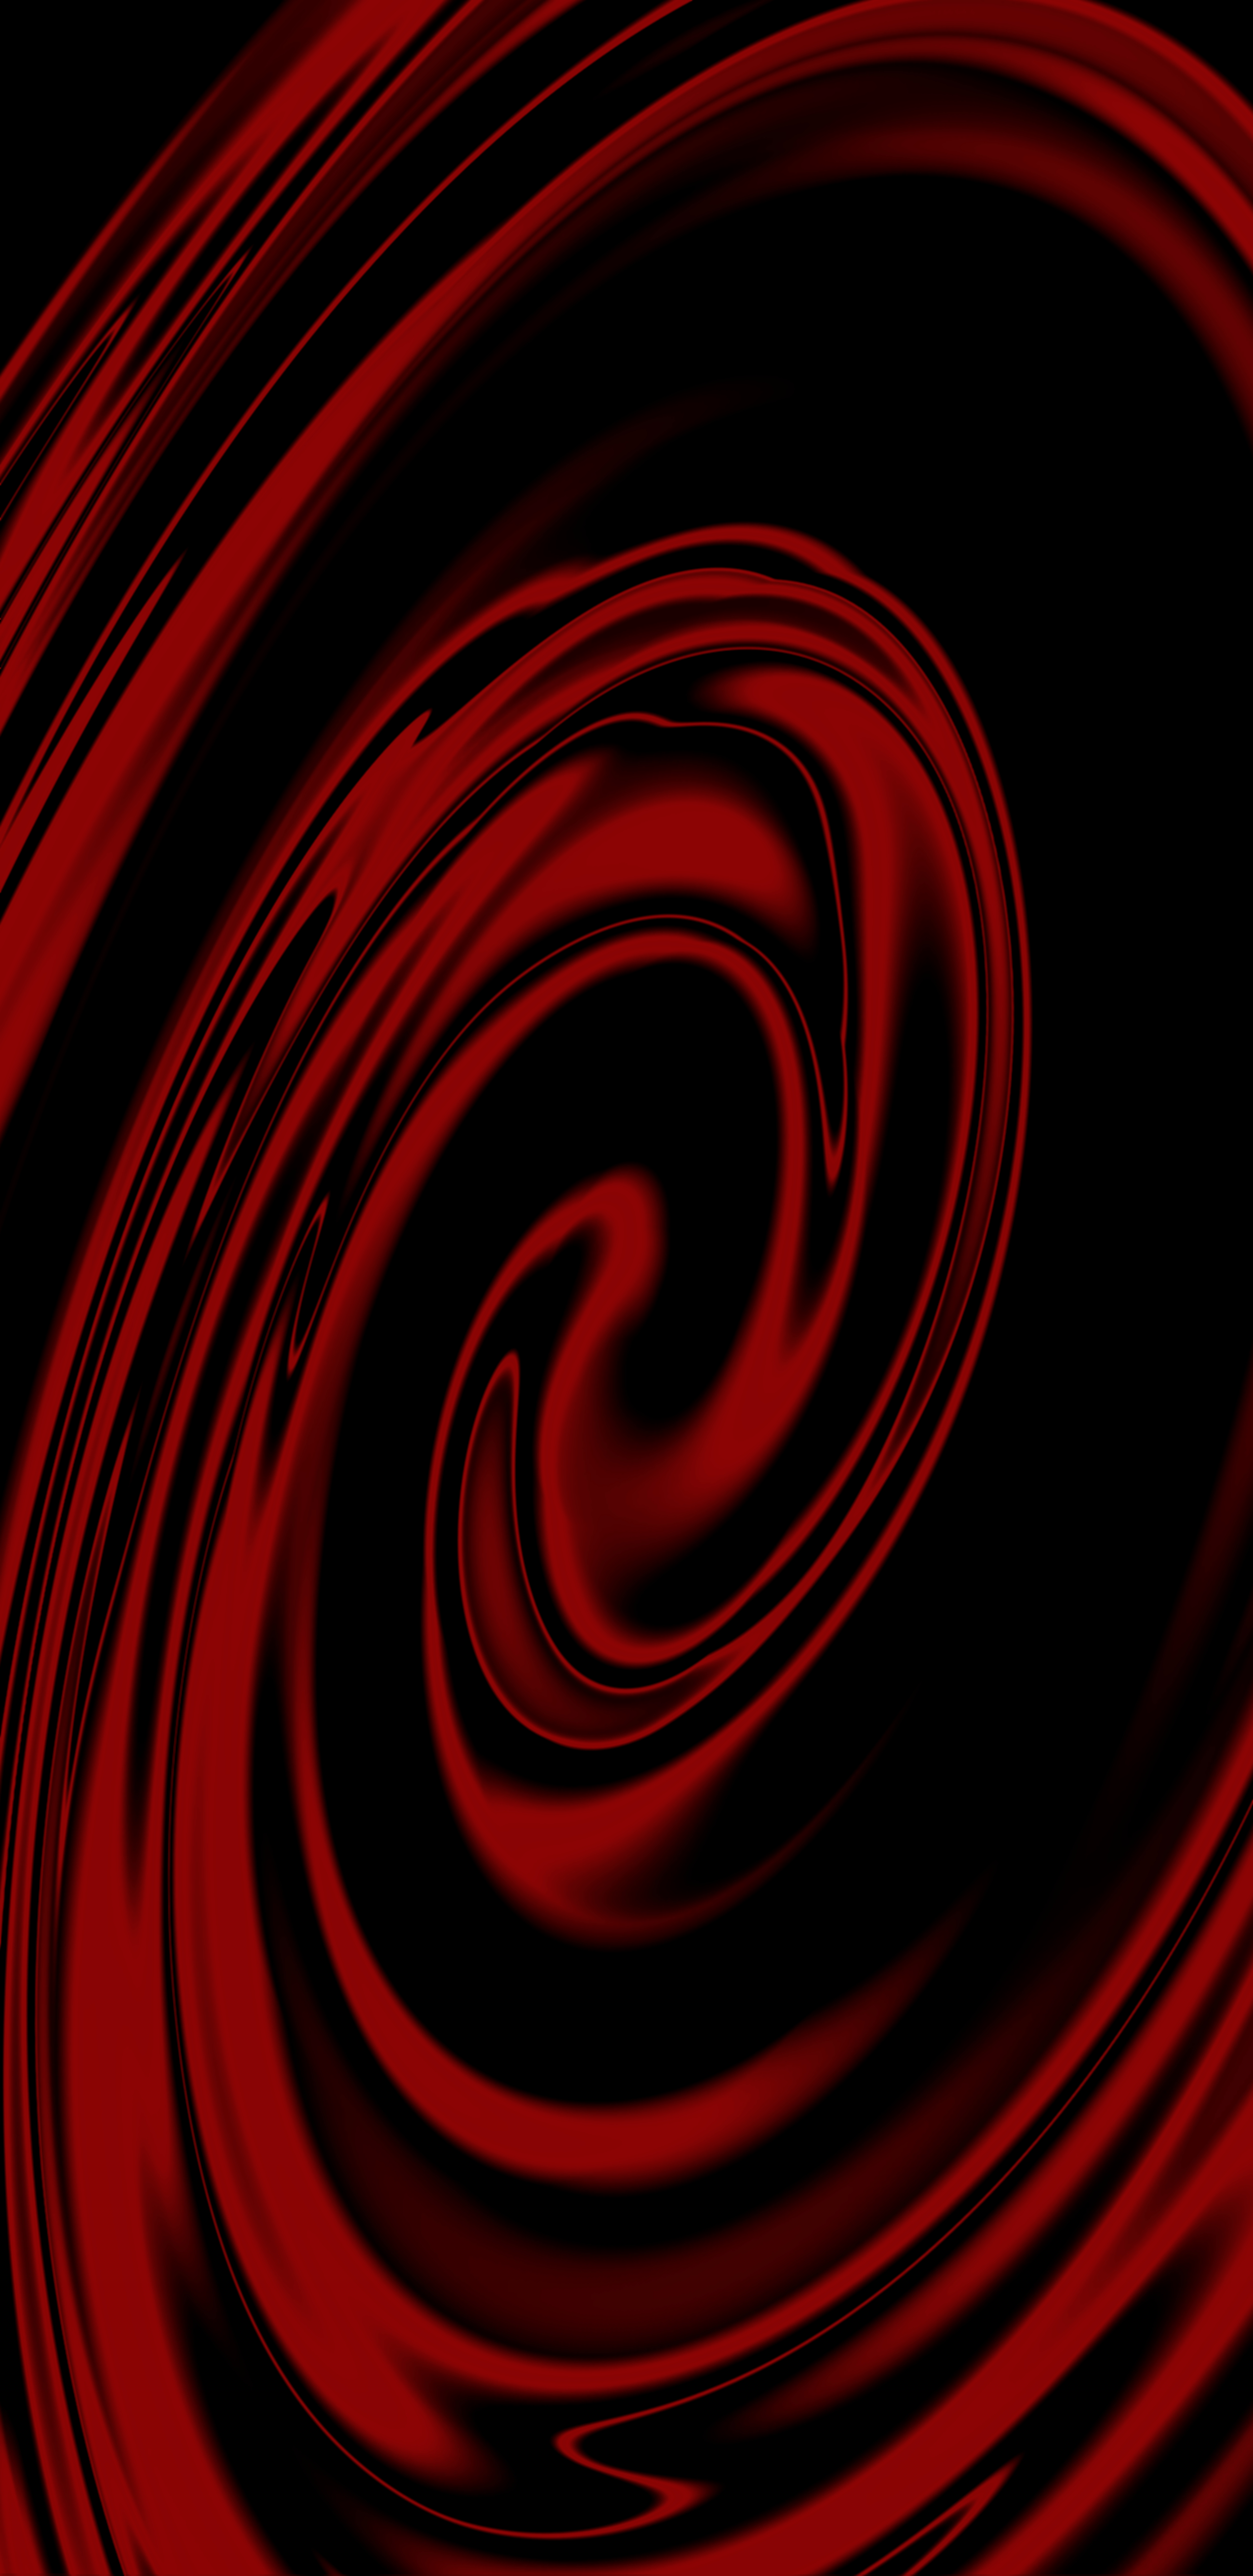 involute, abstract, black, red, spiral, swirling 8K